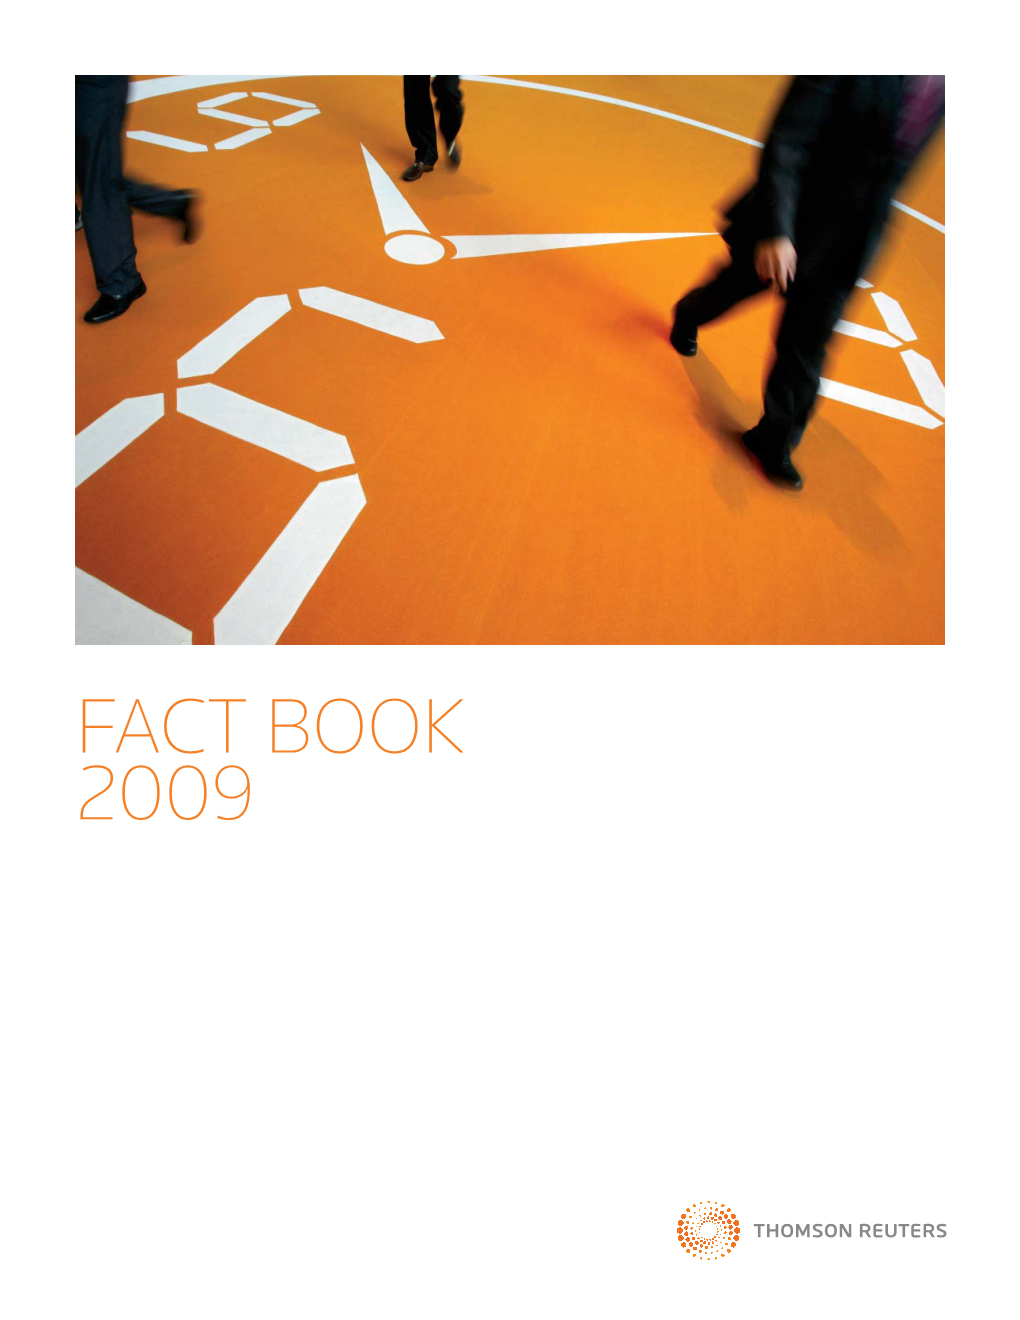 Thomson Reuters Fact Book 2009 1 BUSINESS OVERVIEW